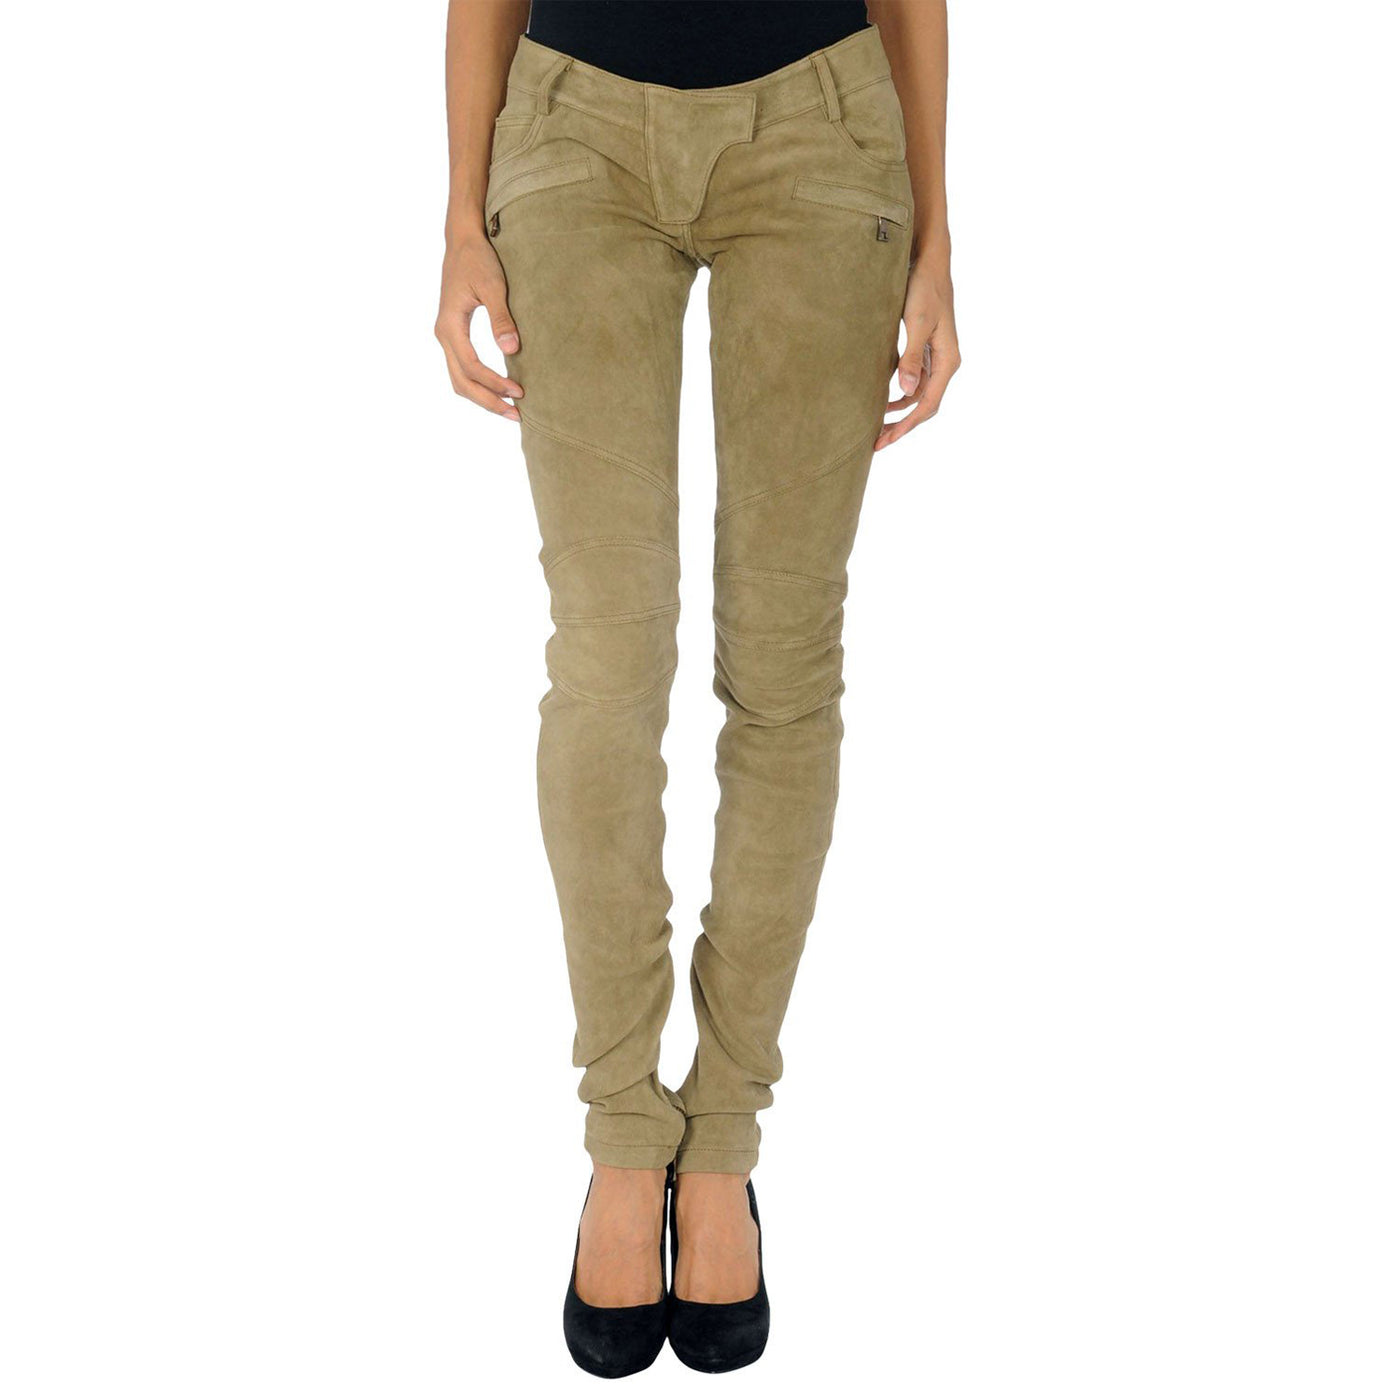 soft and cozy Beige Suede leather pants